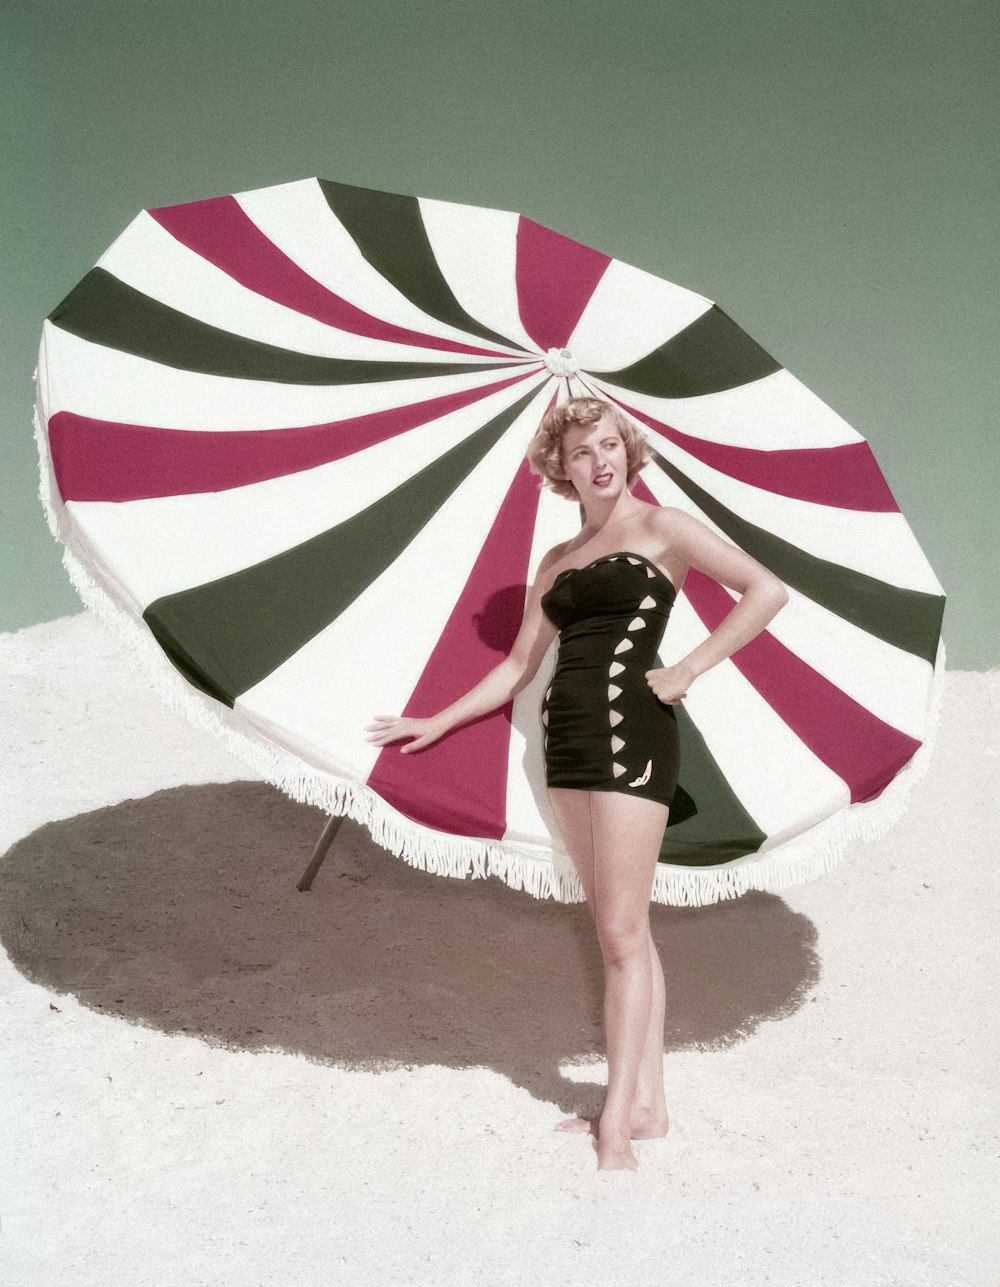 a woman in a bathing suit holding a large striped umbrella